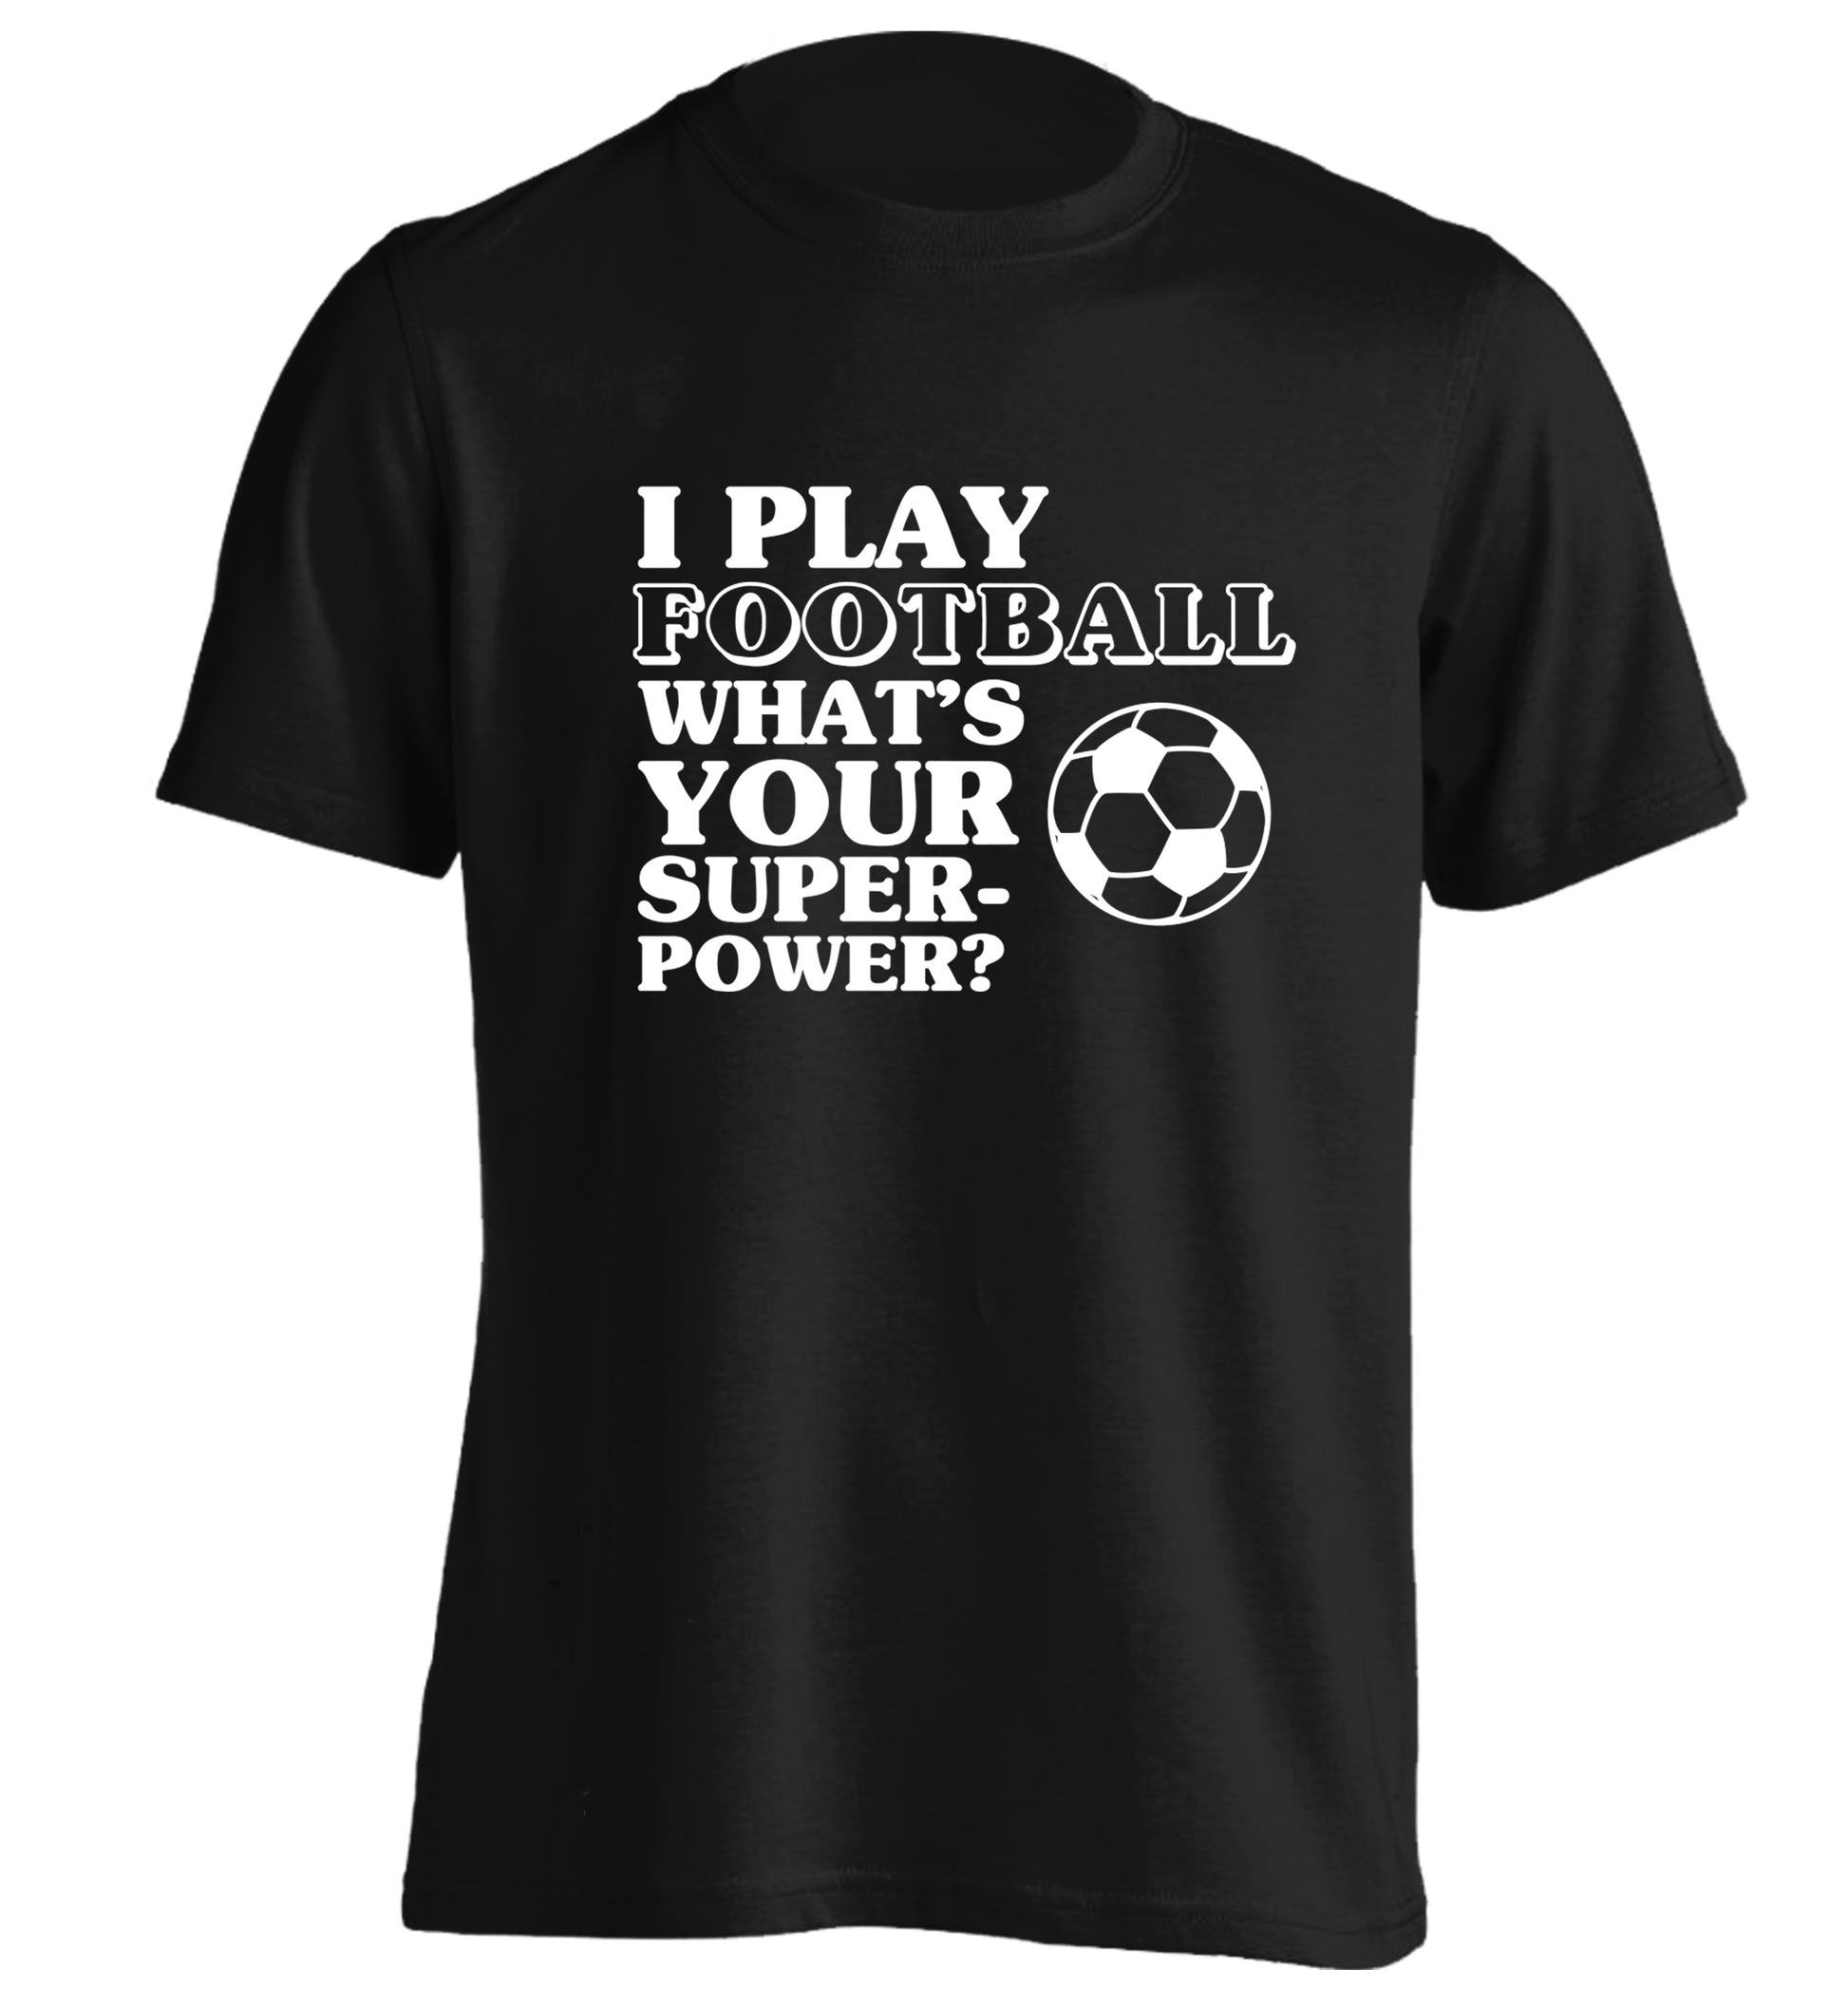 I play football what's your superpower? adults unisexblack Tshirt 2XL